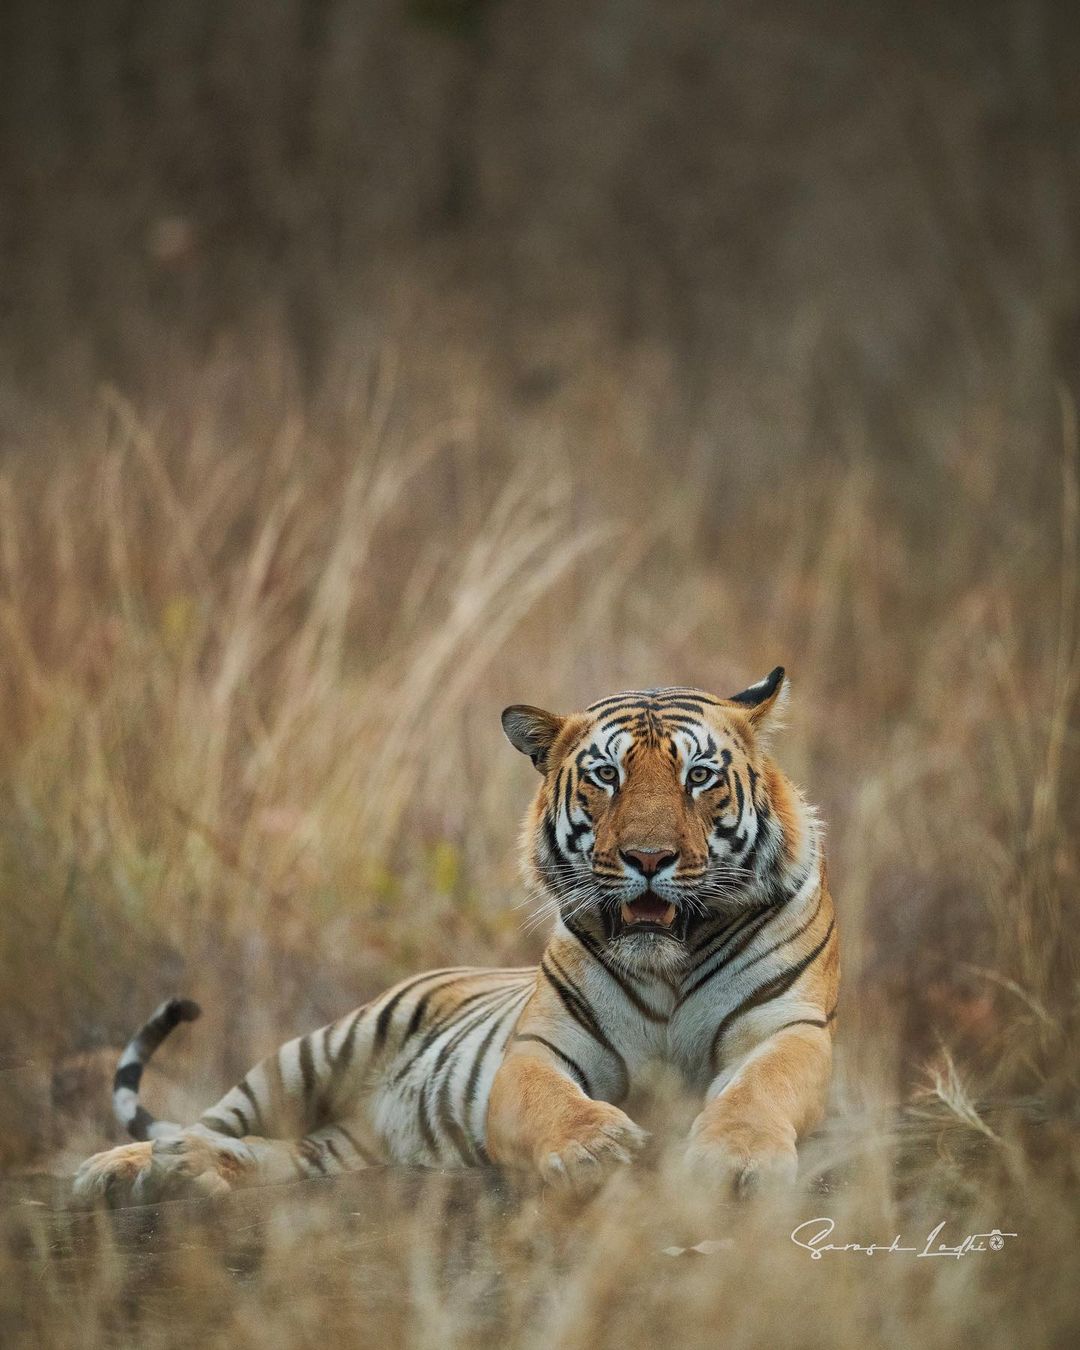 The Satpura National Park is a habitat for several at-risk and endangered species, including Tigers.
